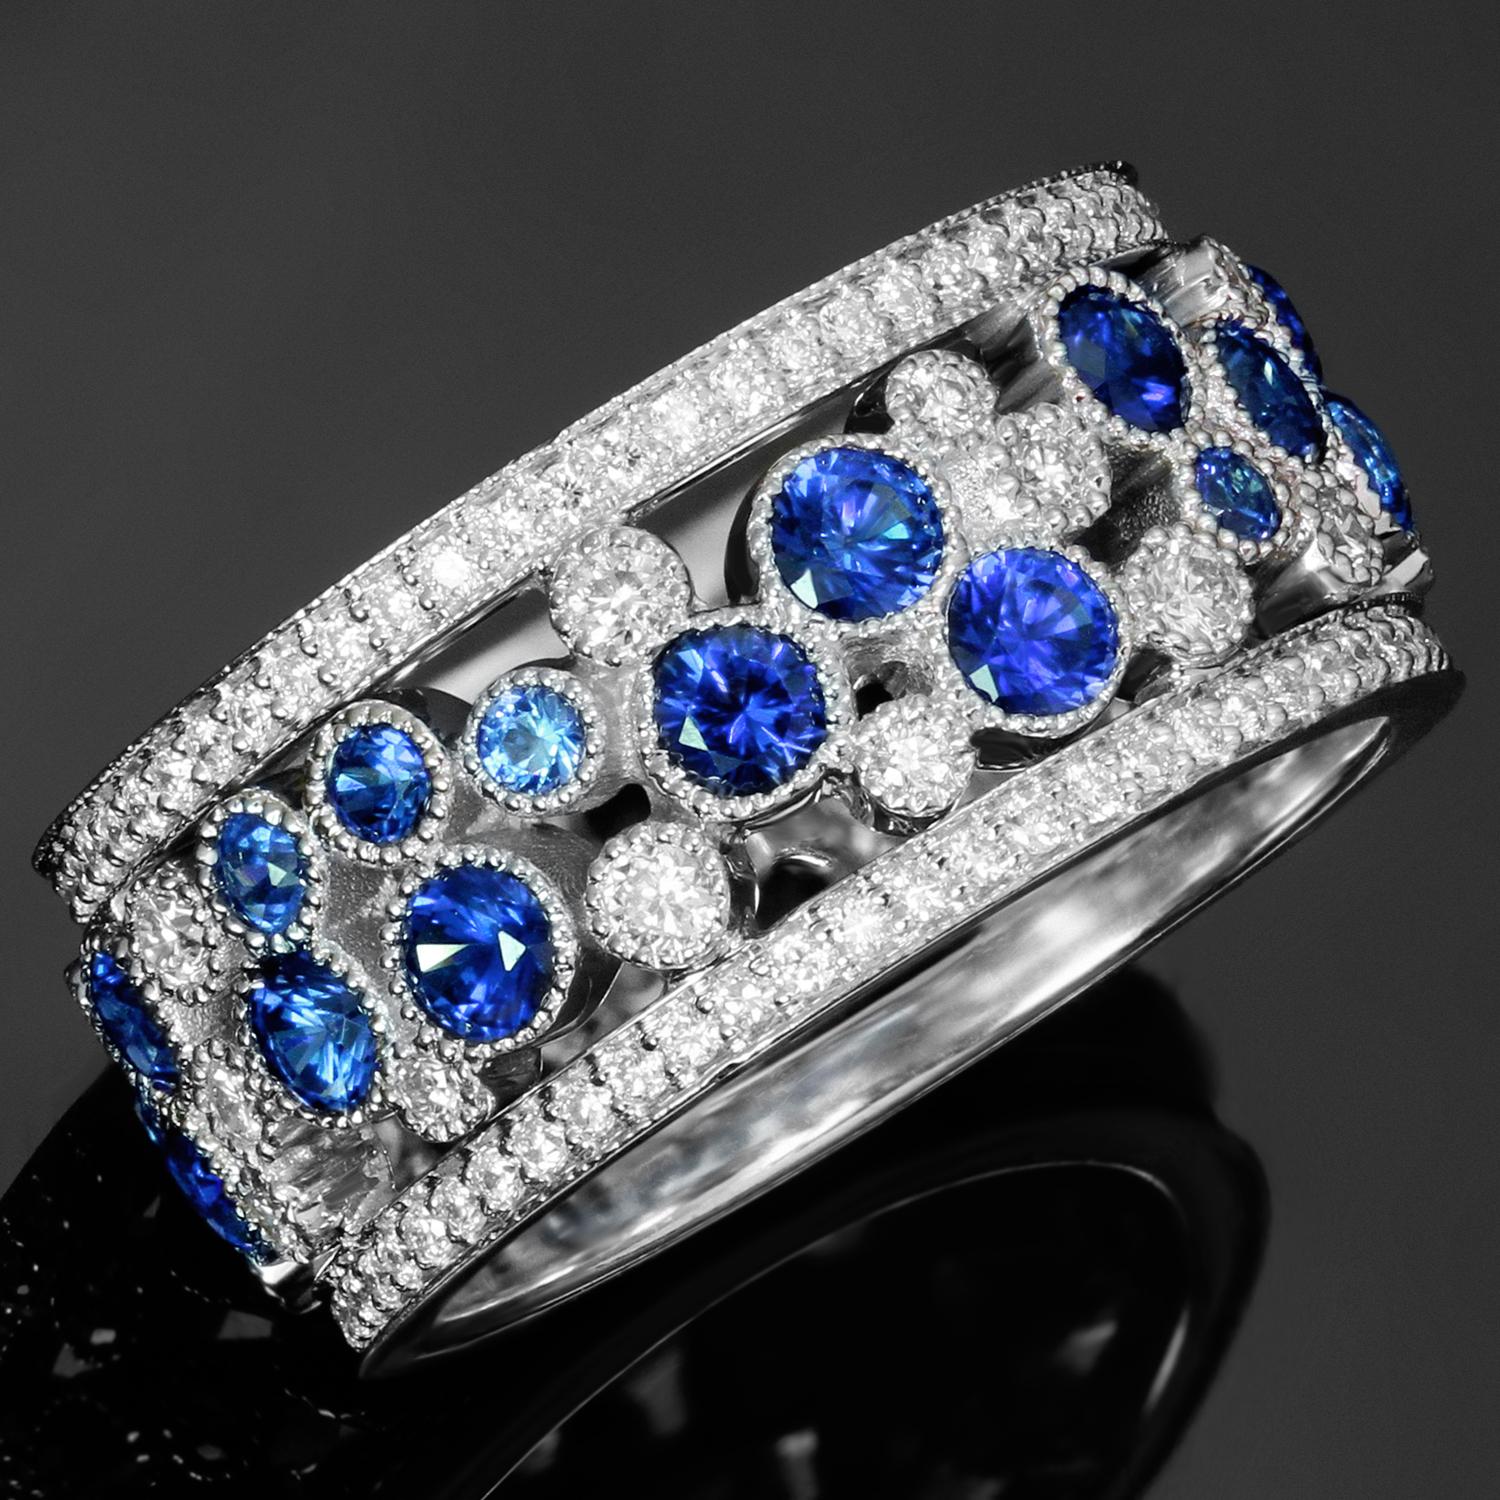 This dazzling wide Tiffany & Co. band from the romantic Cobblestones collection is crafted in platinum and set with multi-sized blue sapphires of an estimated 1.99 carats and brilliant-cut round F-G VVS2-VS1 diamonds of an estimated 0.53 carats.